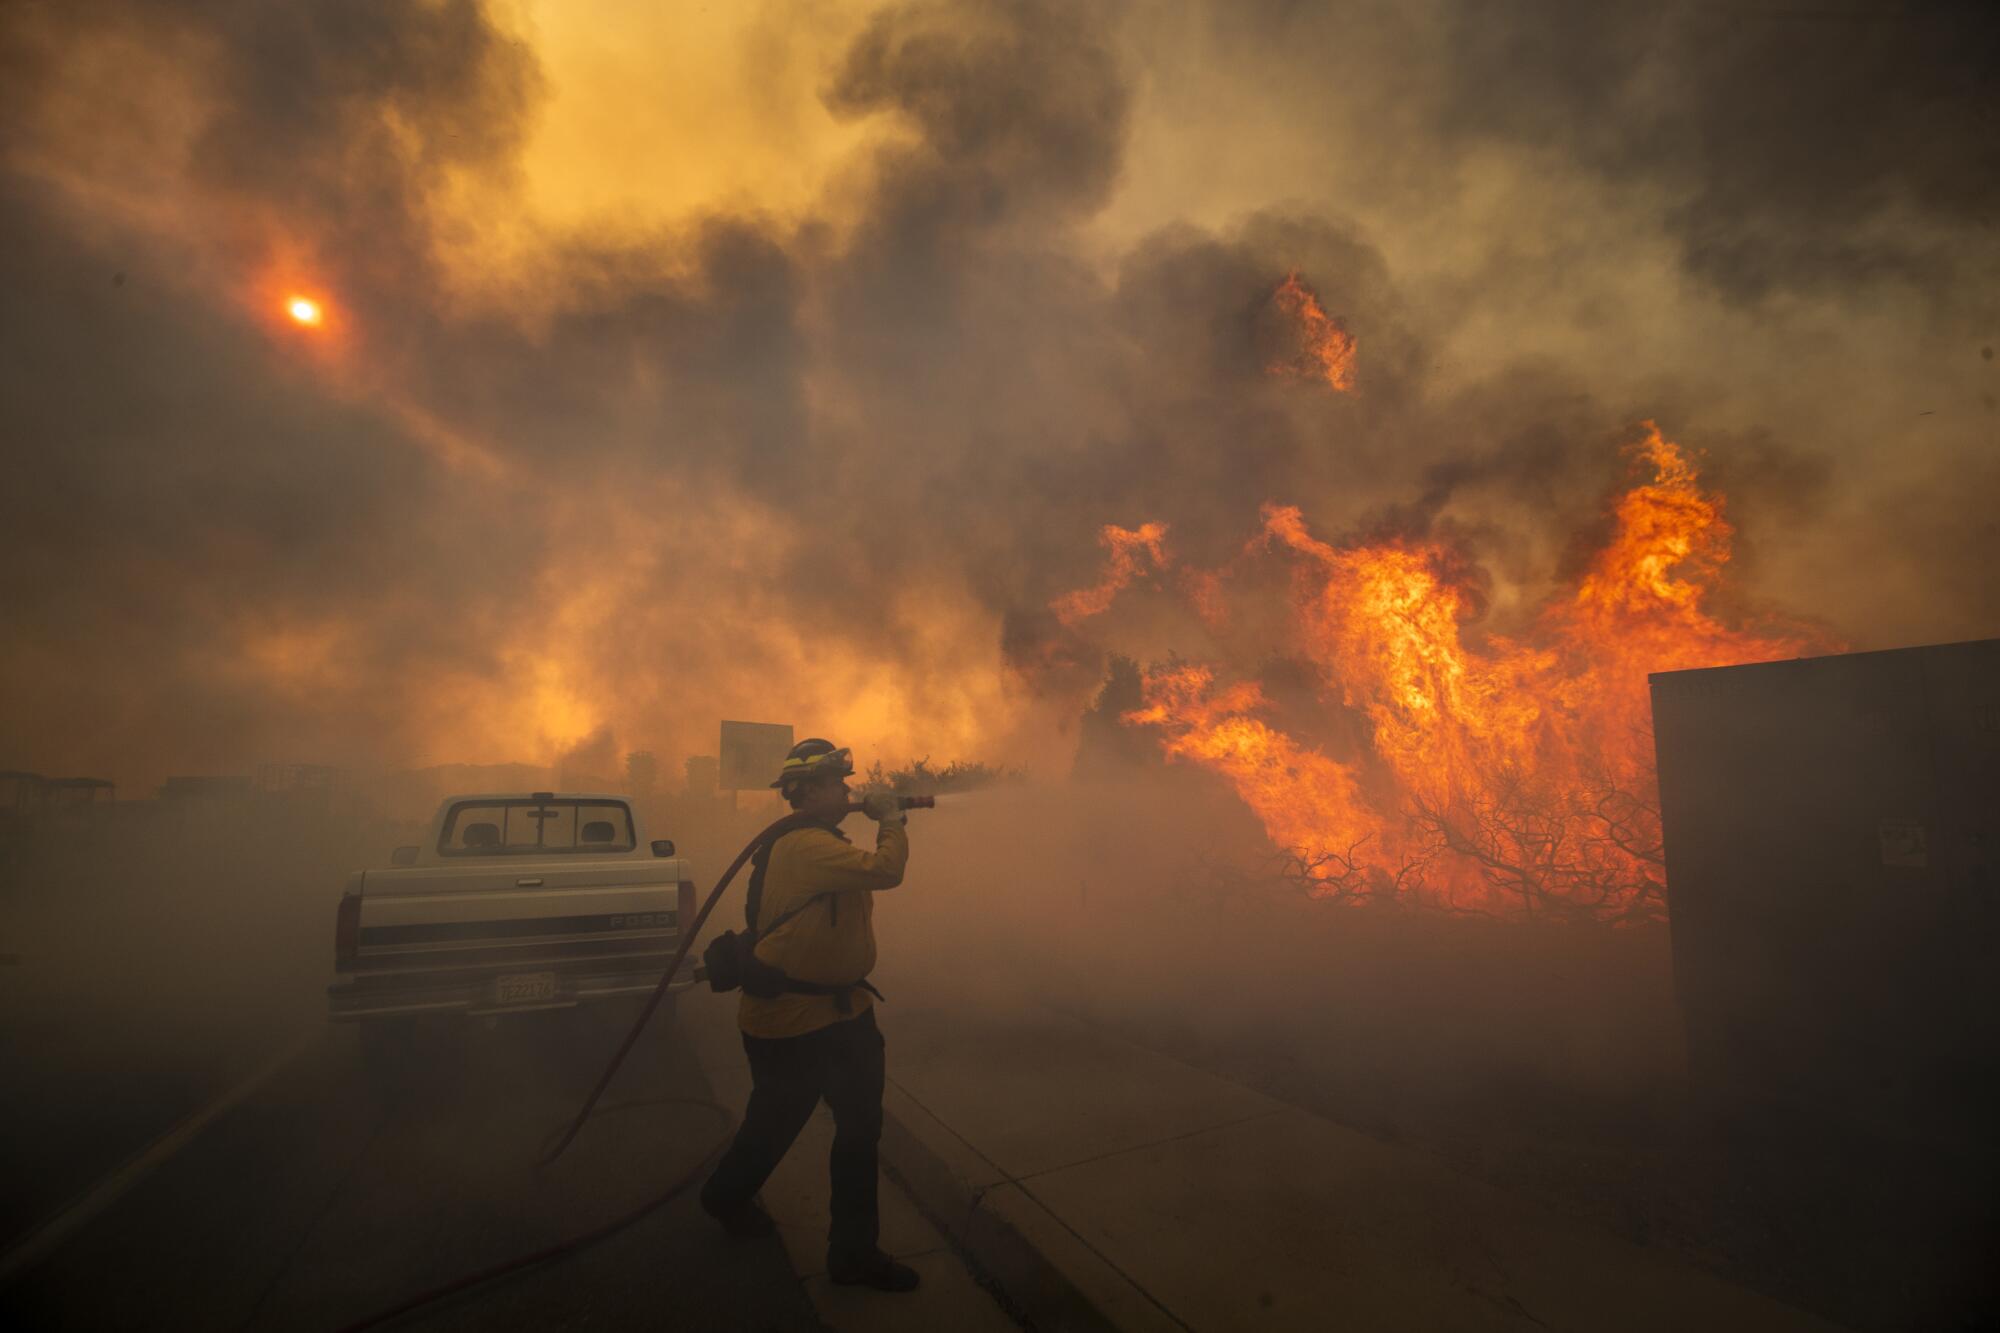 Firefighter Raymond Vasquez fights the Silverado fire fueled by Santa Ana winds at the 241 Freeway.